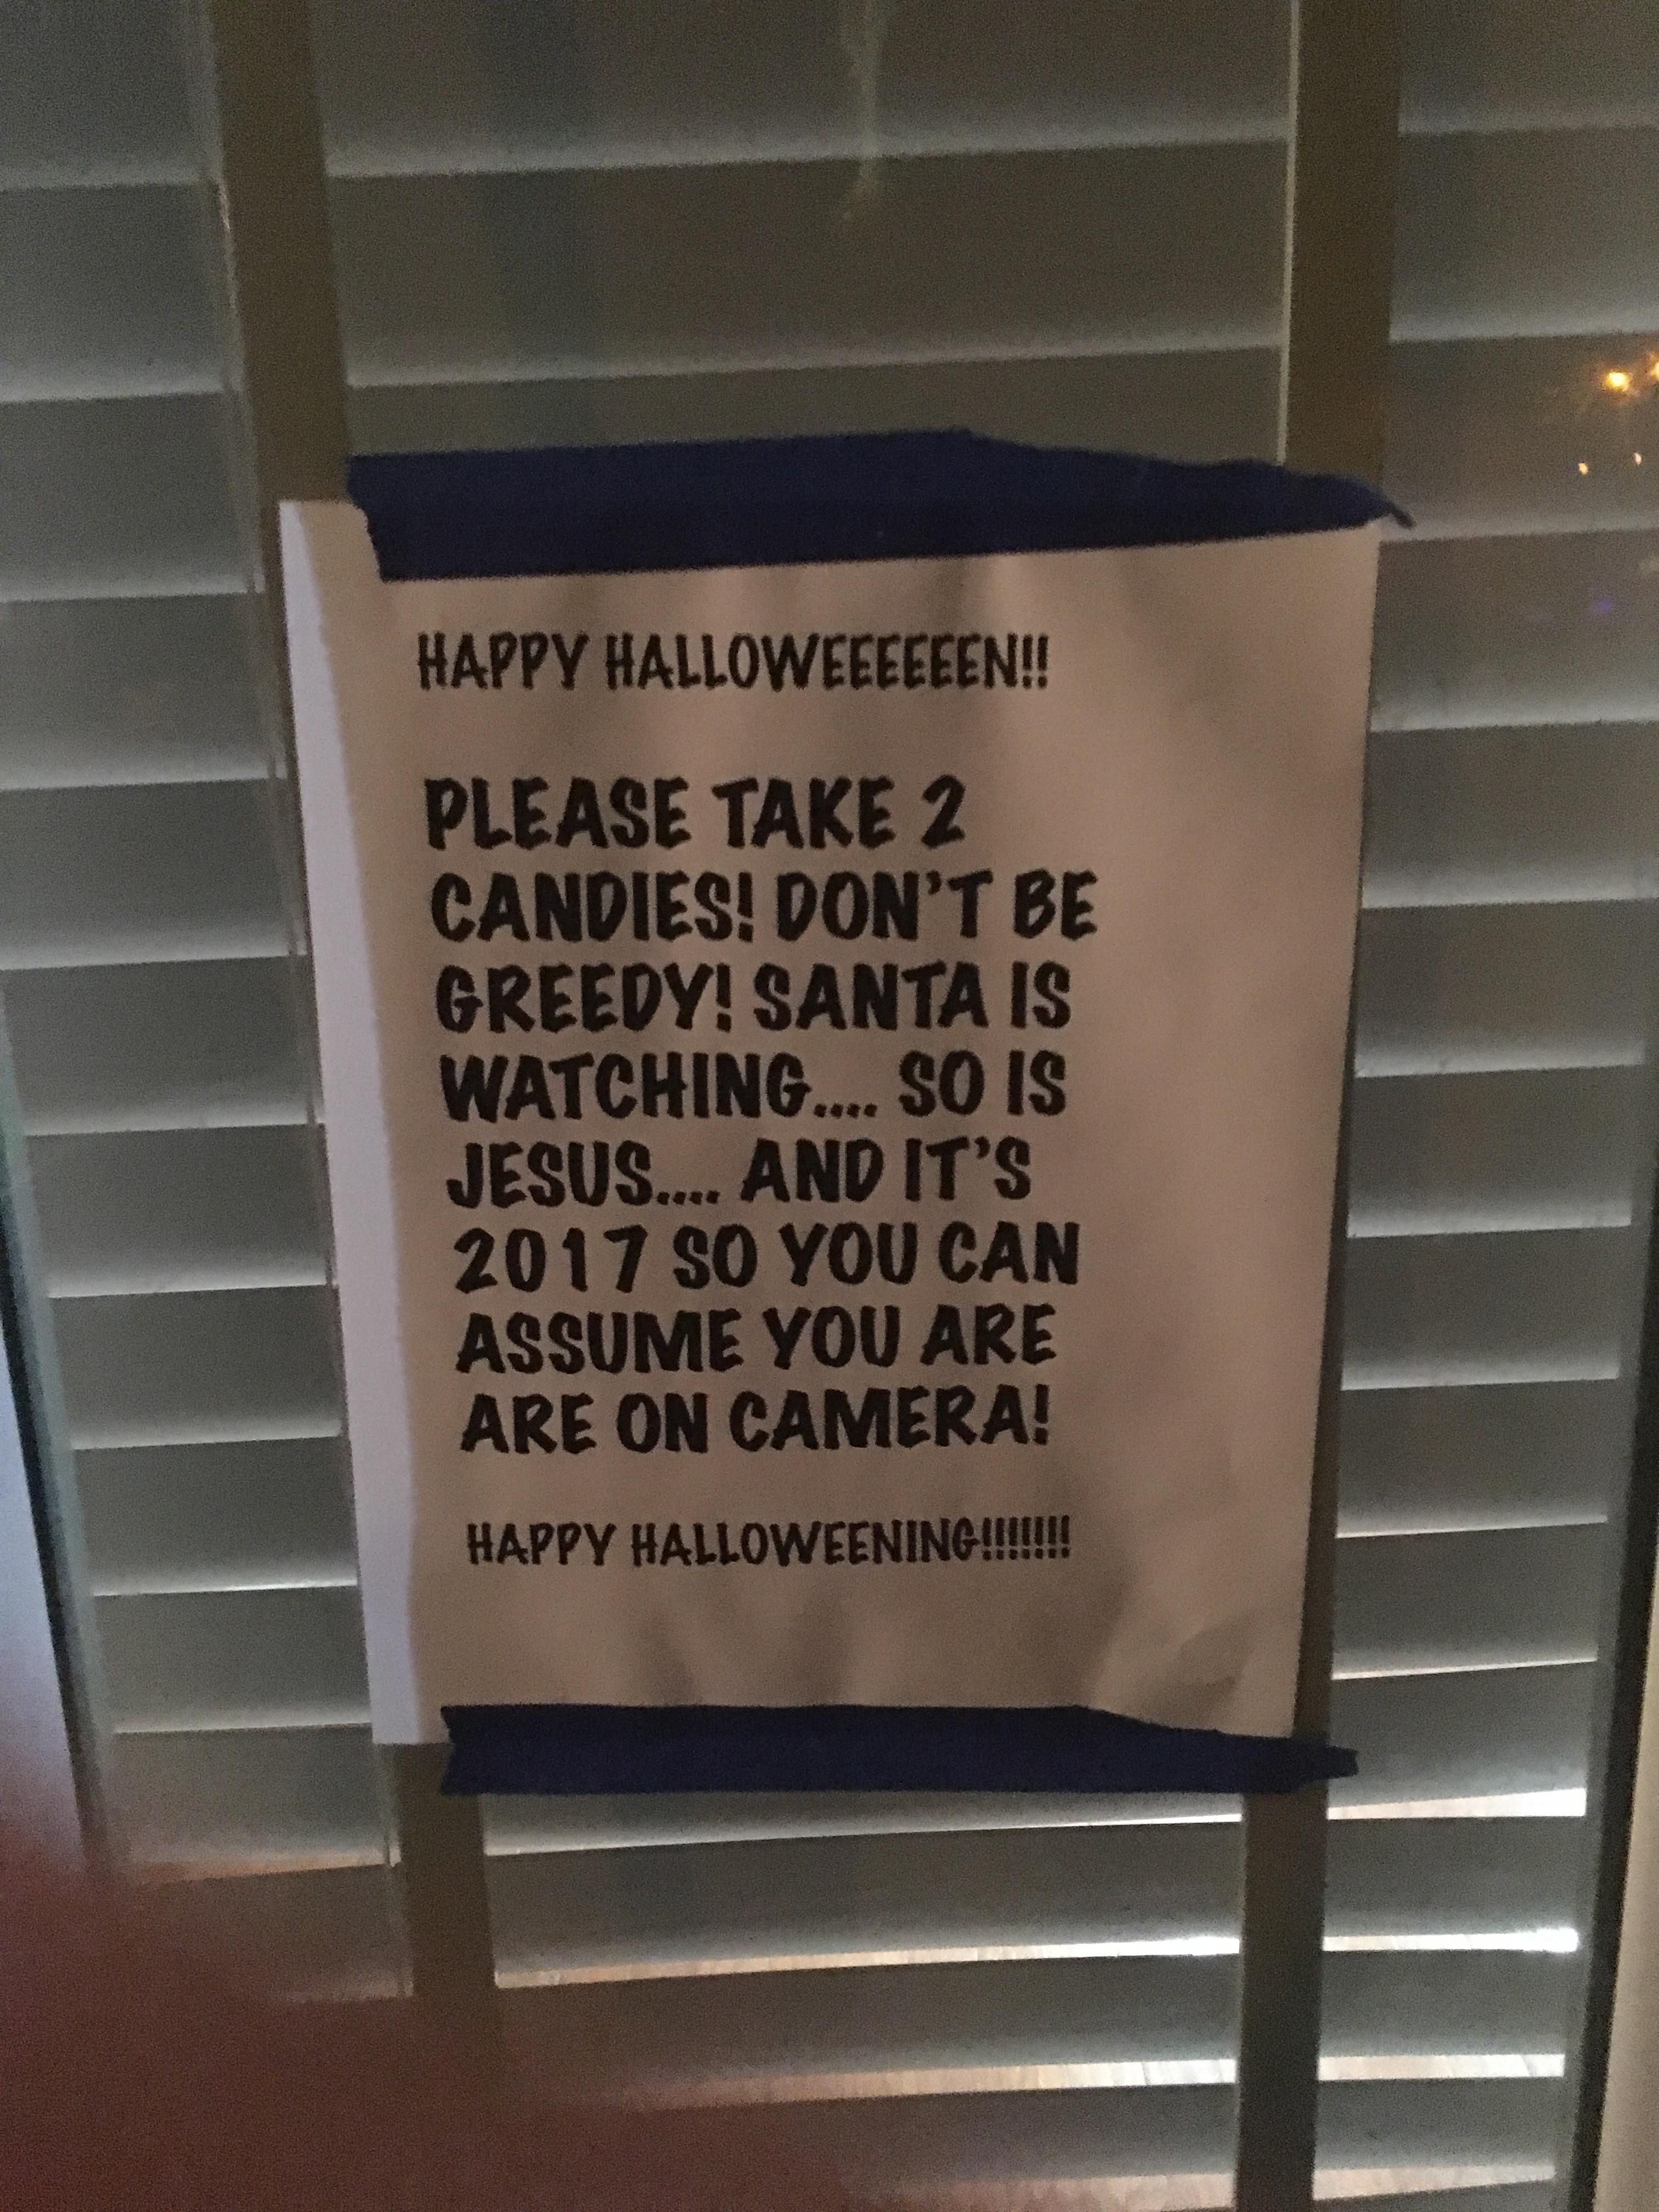 Found this when I went trick or treating on Halloween